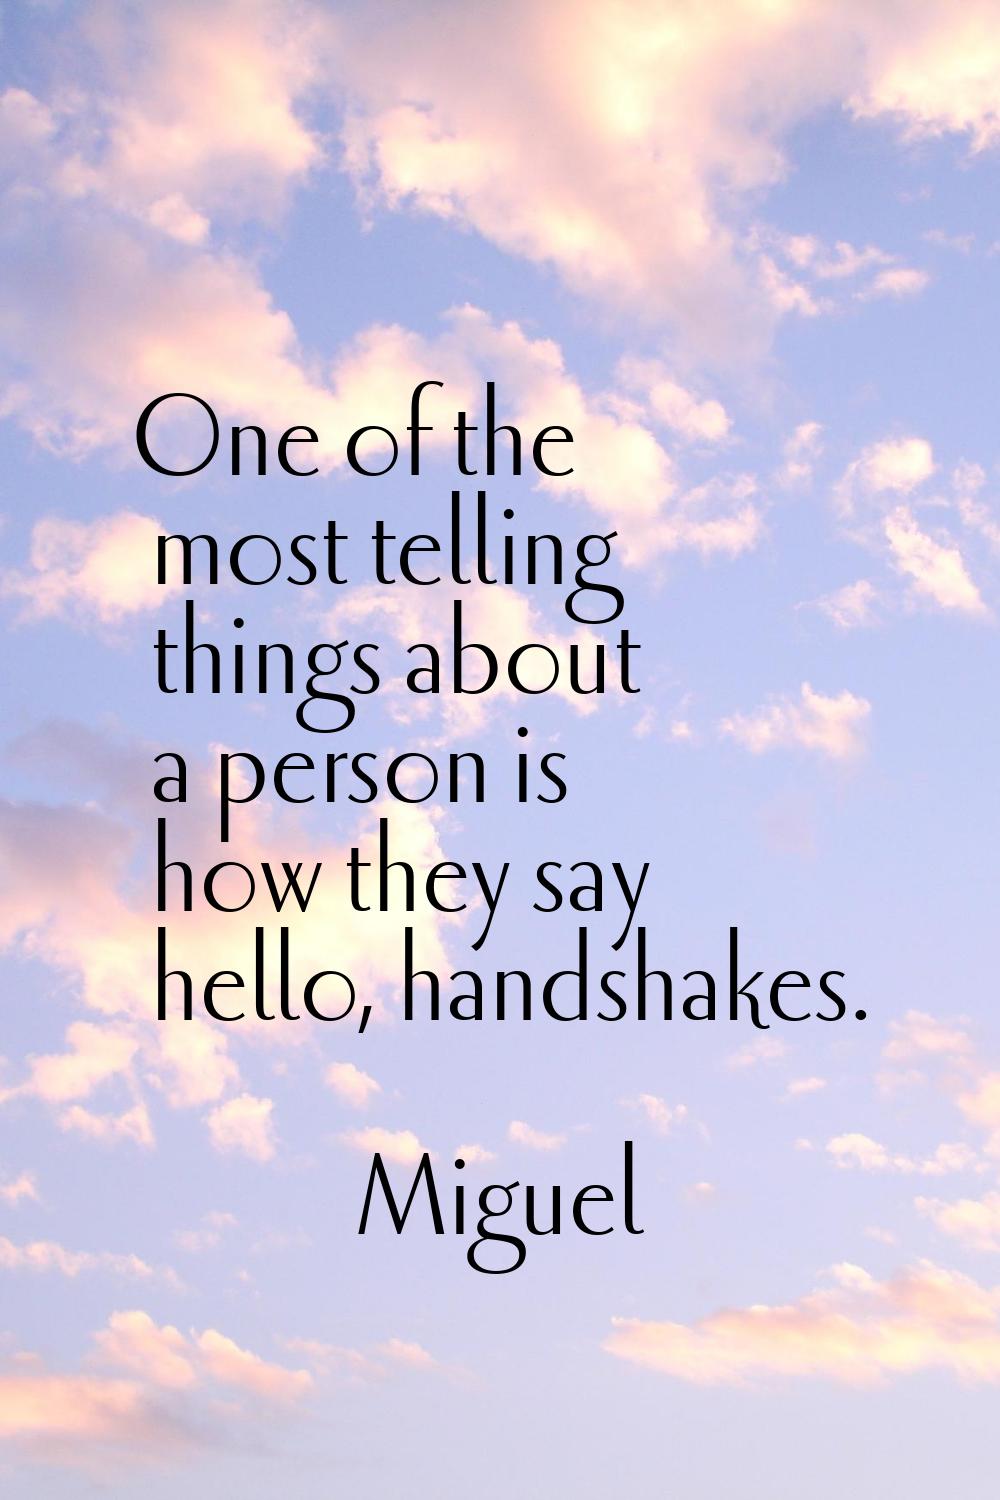 One of the most telling things about a person is how they say hello, handshakes.